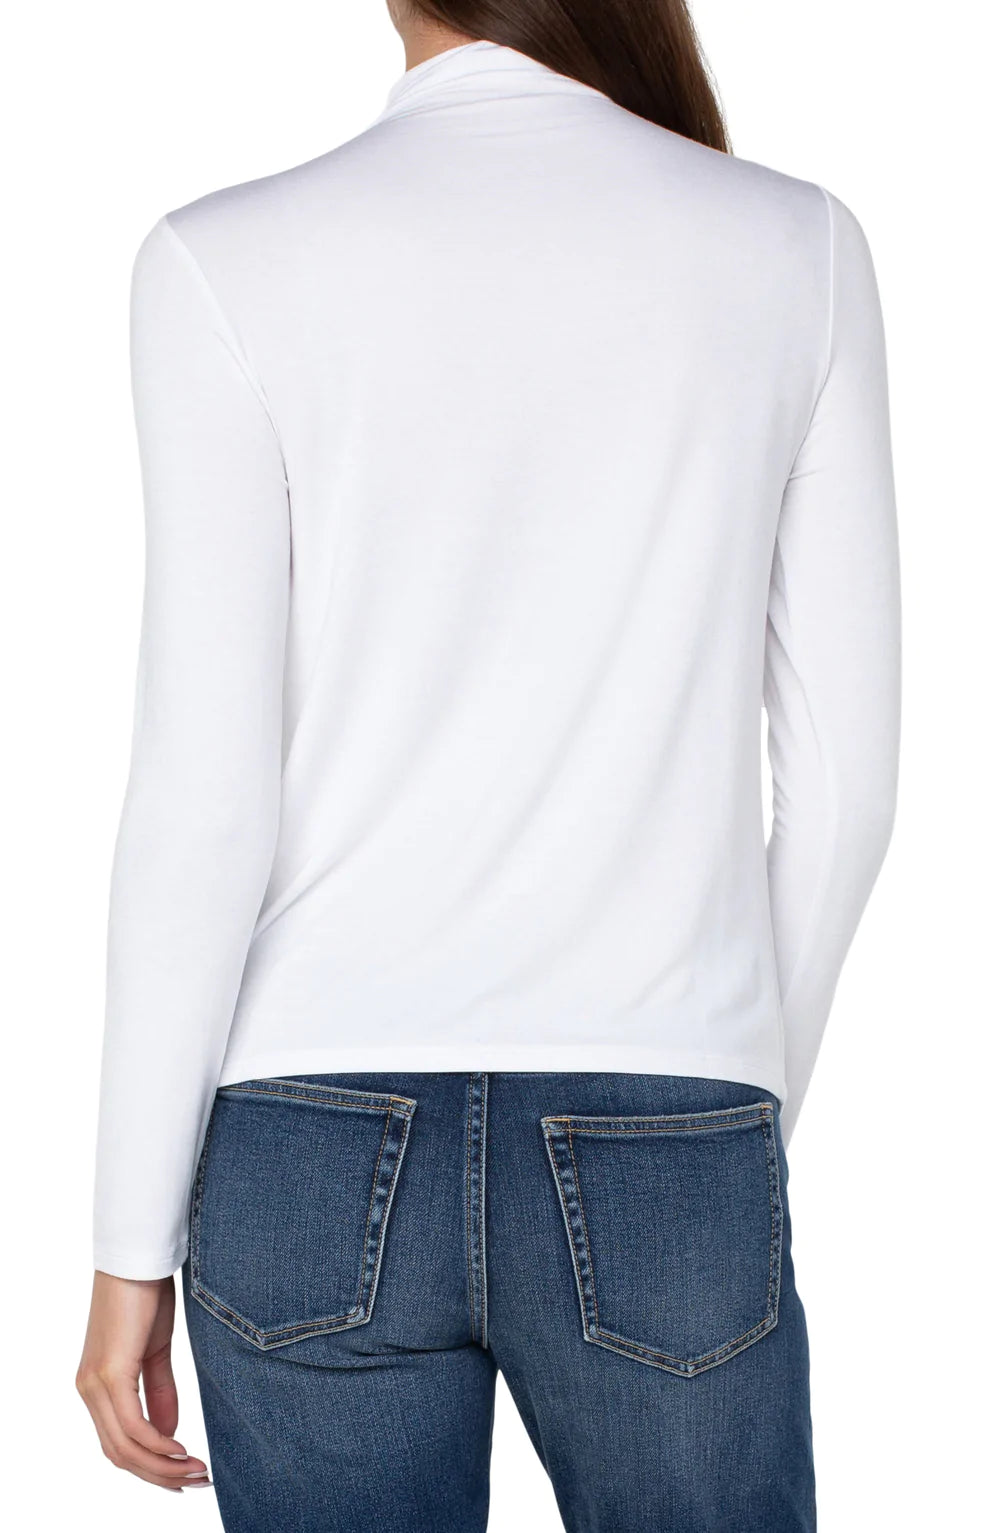 LIVERPOOL LONG SLEEVE MOCK NECK KNIT TOP